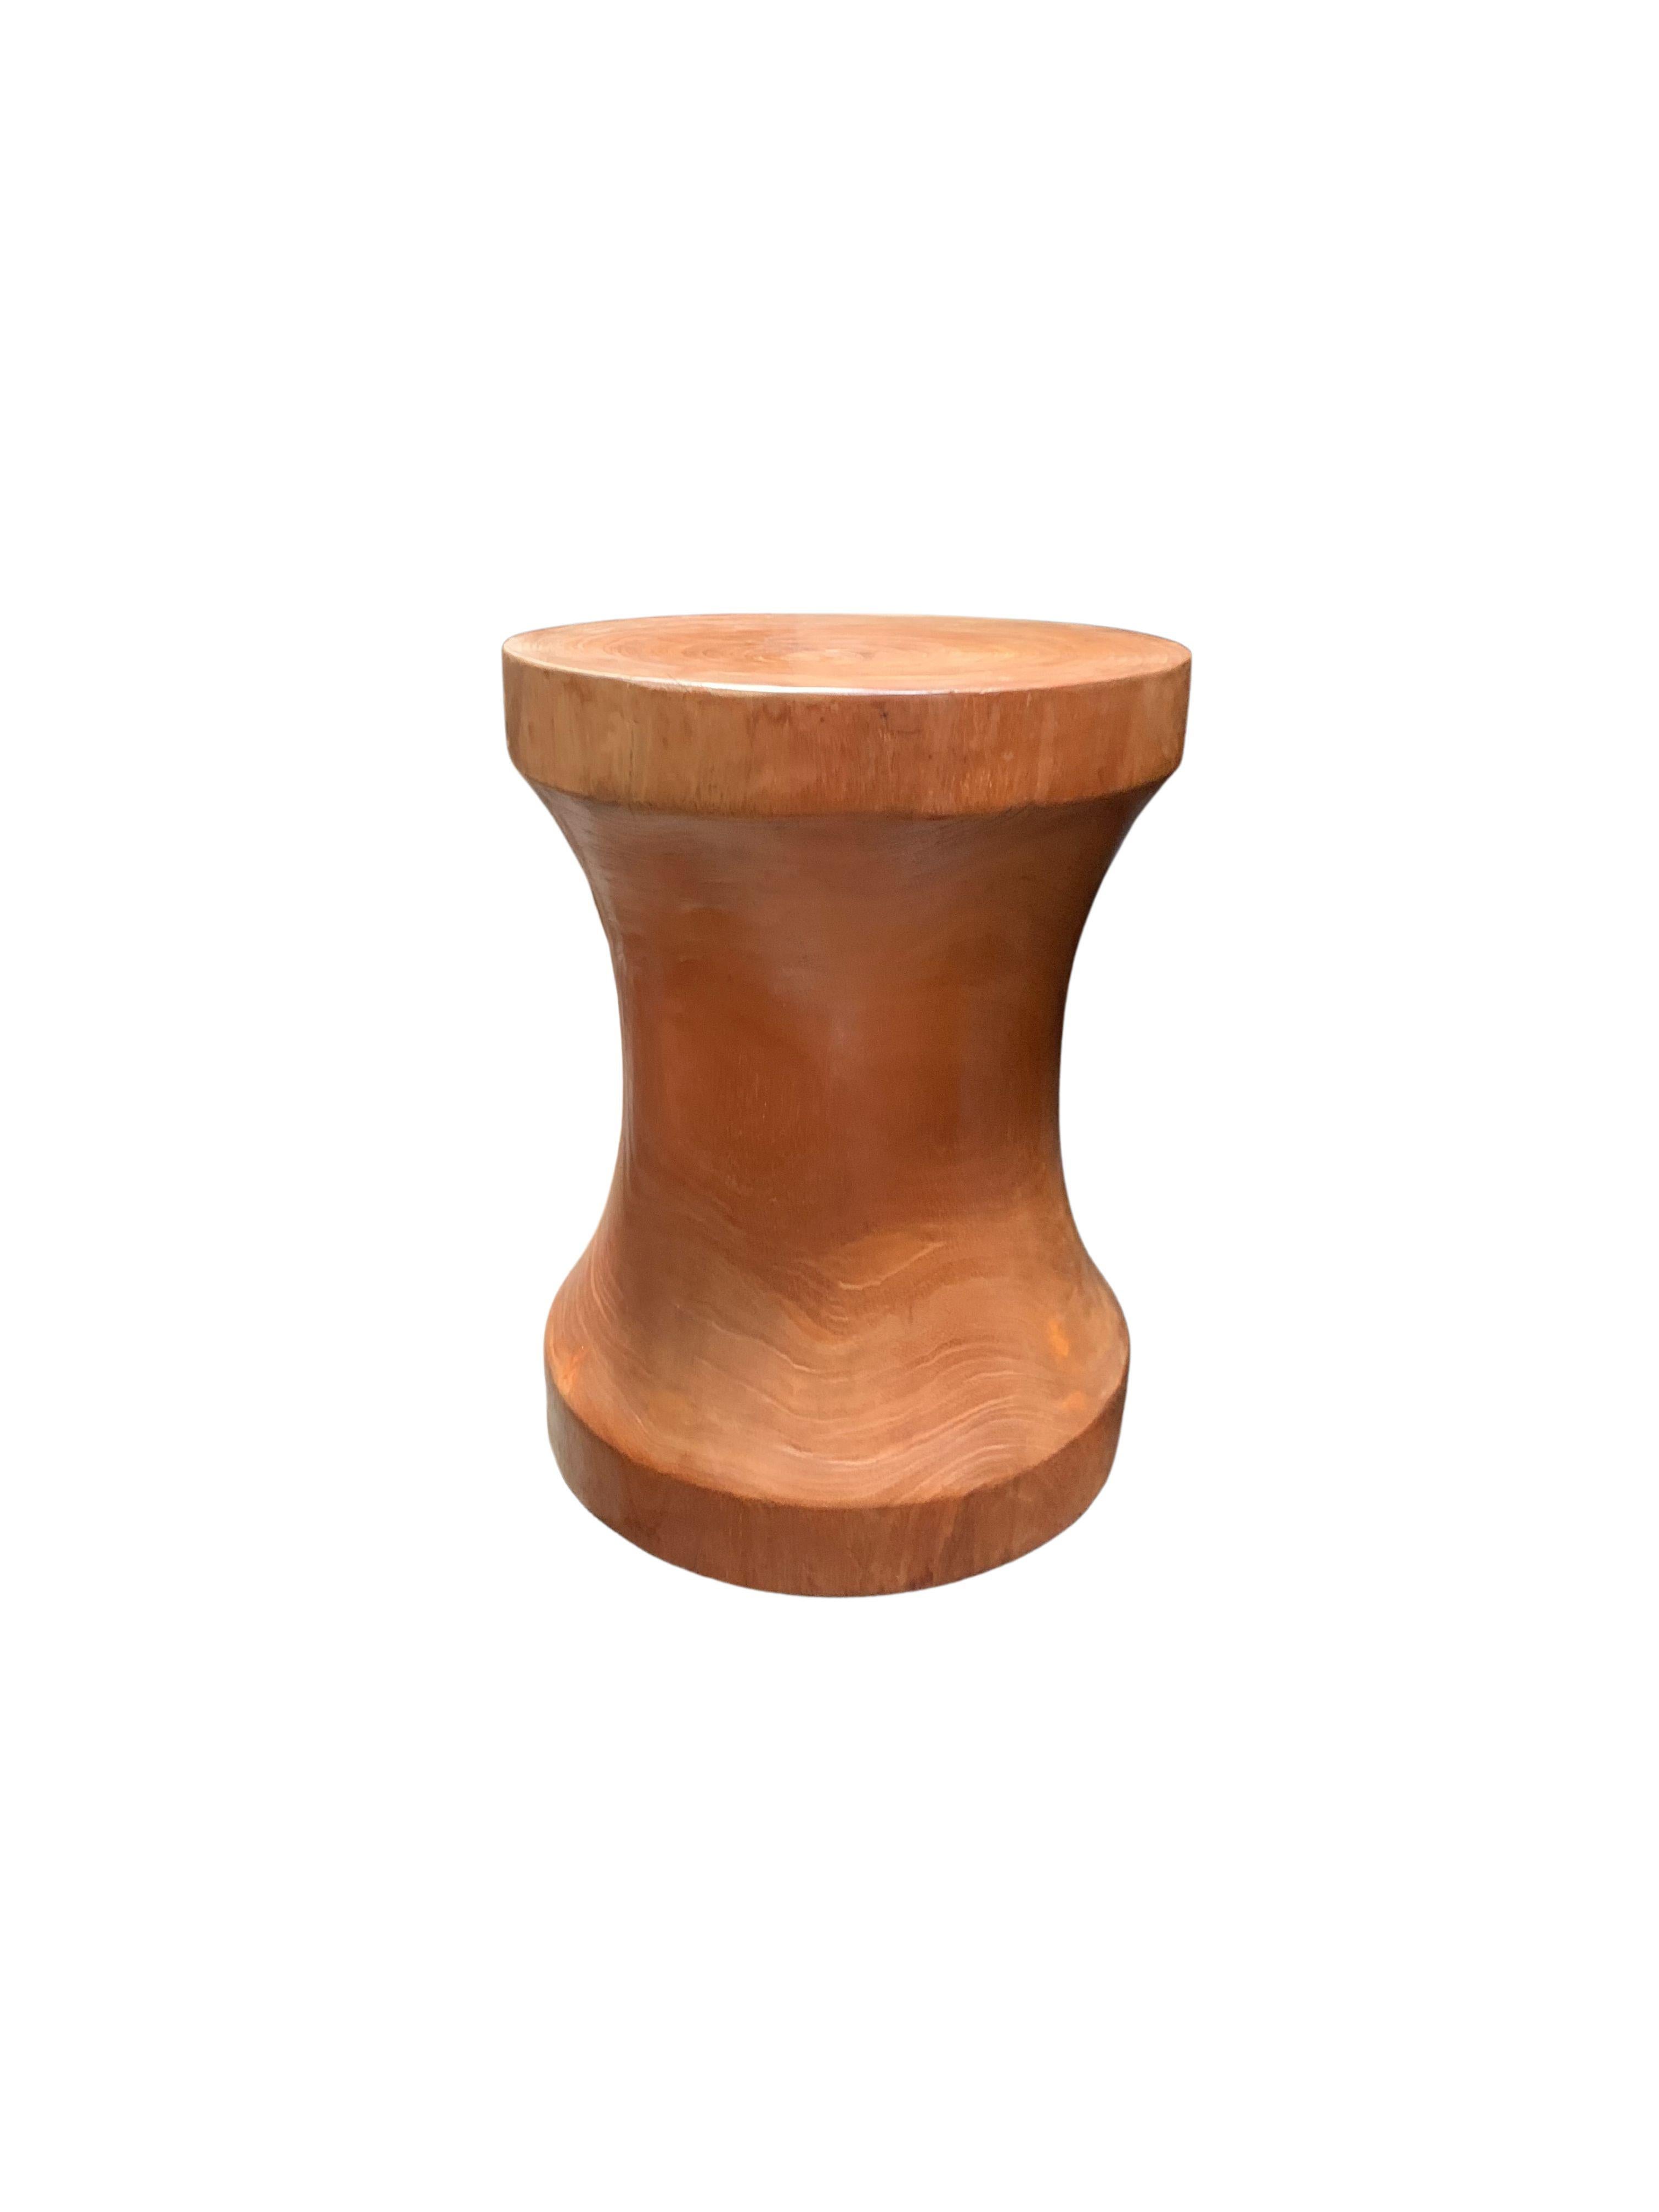 A wonderfully sculptural round side table with clear coated finish. Its neutral pigment and wood texture makes it perfect for any space. Carved from a solid trunk of mango wood, the wood textures are brought to life. A uniquely sculptural and